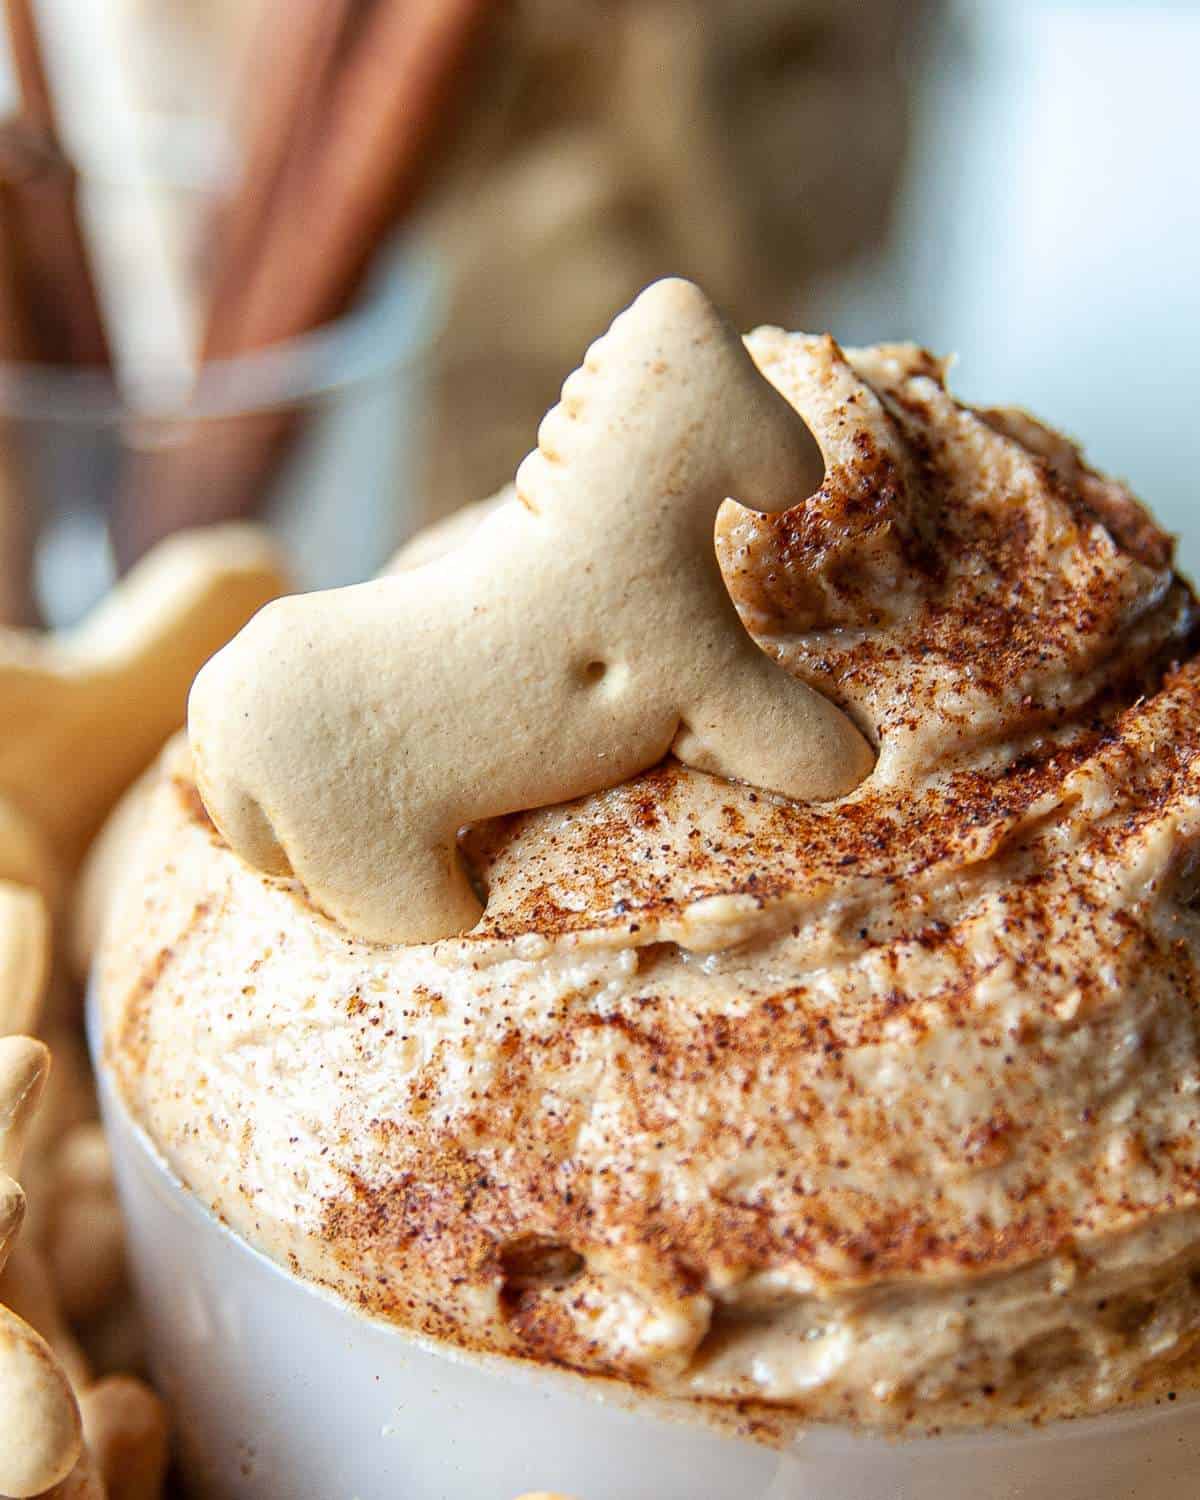 Peanut butter yogurt dip being served in a bowl with animal crackers. 